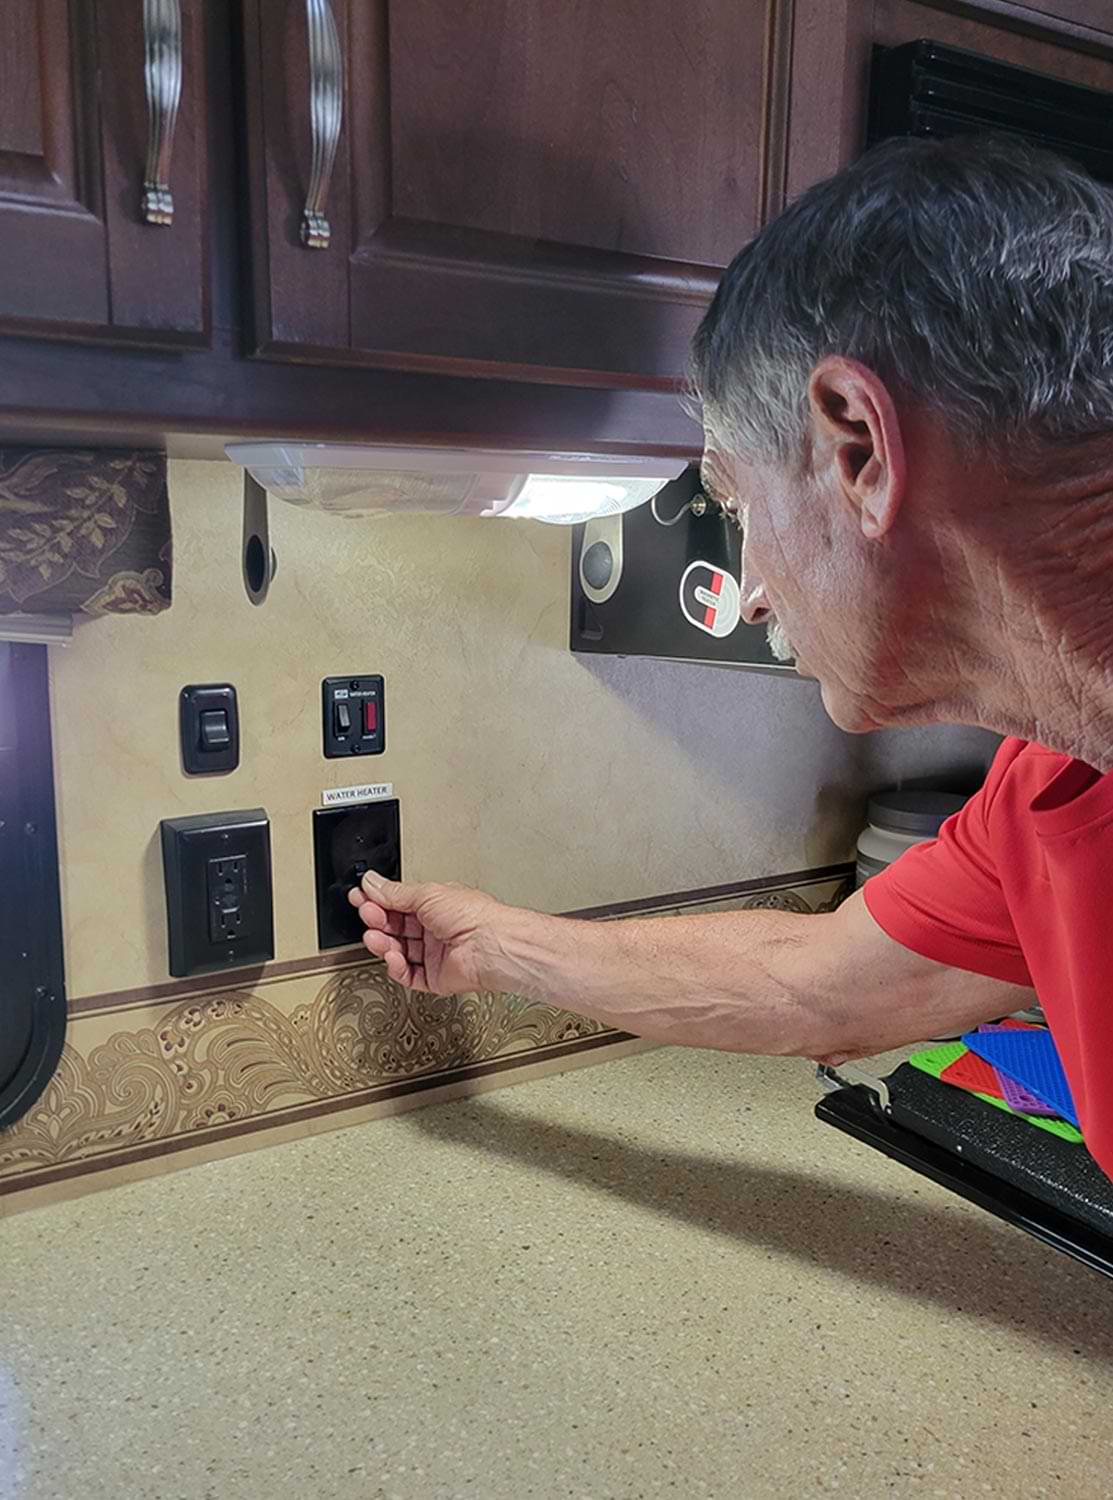 technician turns off the switch for the water heater